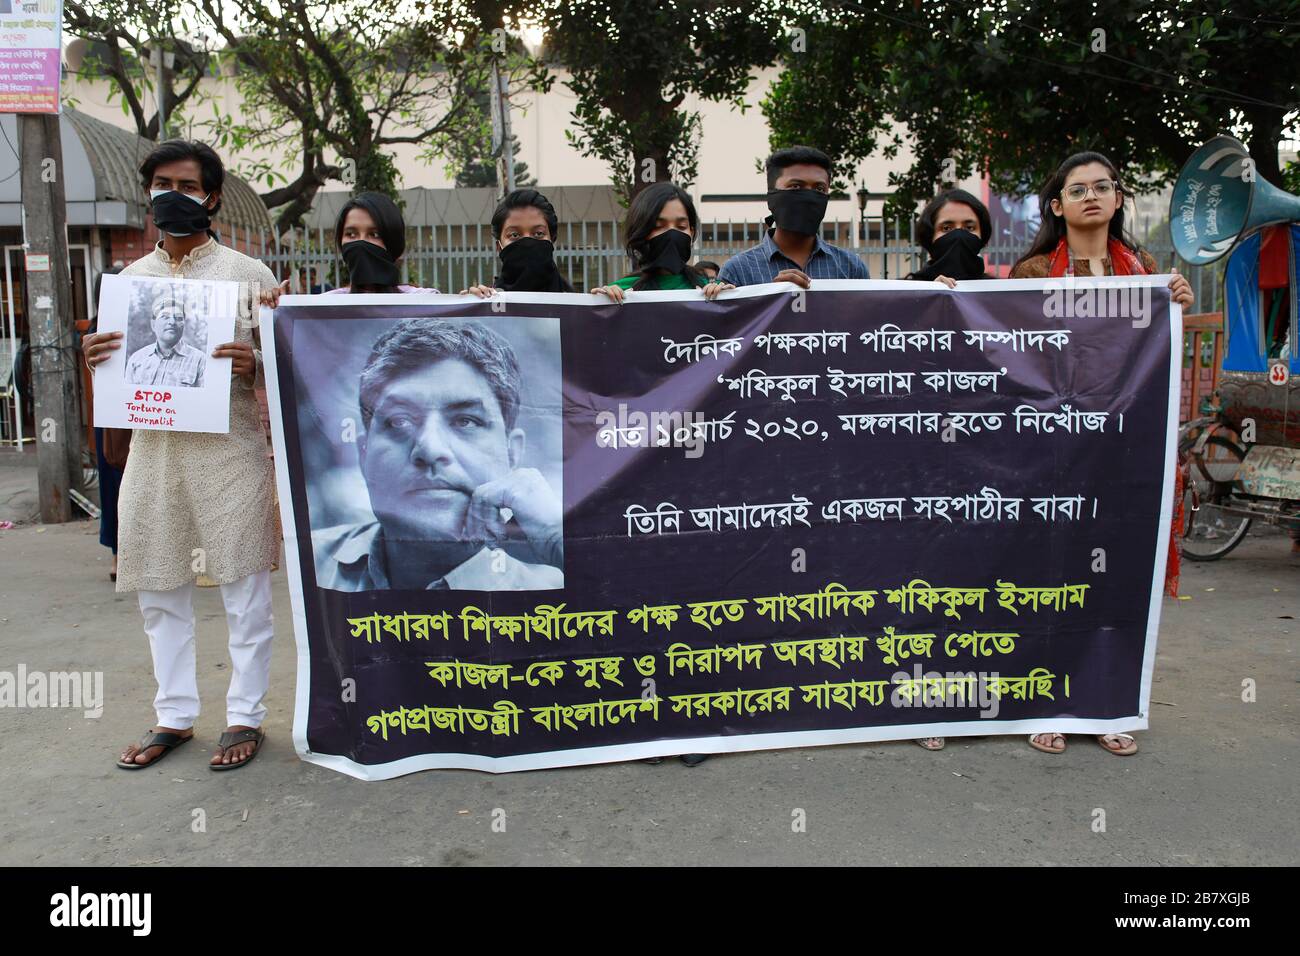 Dhaka, Bangladesh. 18th Mar, 2020. Bangladeshi photographers and social activists gather in a protest and formed a human chain demanding government trace missing photojournalist Shafiqul Islam Kajal, in Dhaka, Bangladesh, March 18, 2020. Shafiqul Islam Kazal went missing on 10th of this month, a day after defamation charges were lodged against him by an influential governing party legislator. Kazal, who worked as a senior photographer for several top dailies and edited his own small newspaper, disappeared after leaving his Dhaka home for work. Credit: ZUMA Press, Inc./Alamy Live News Stock Photo